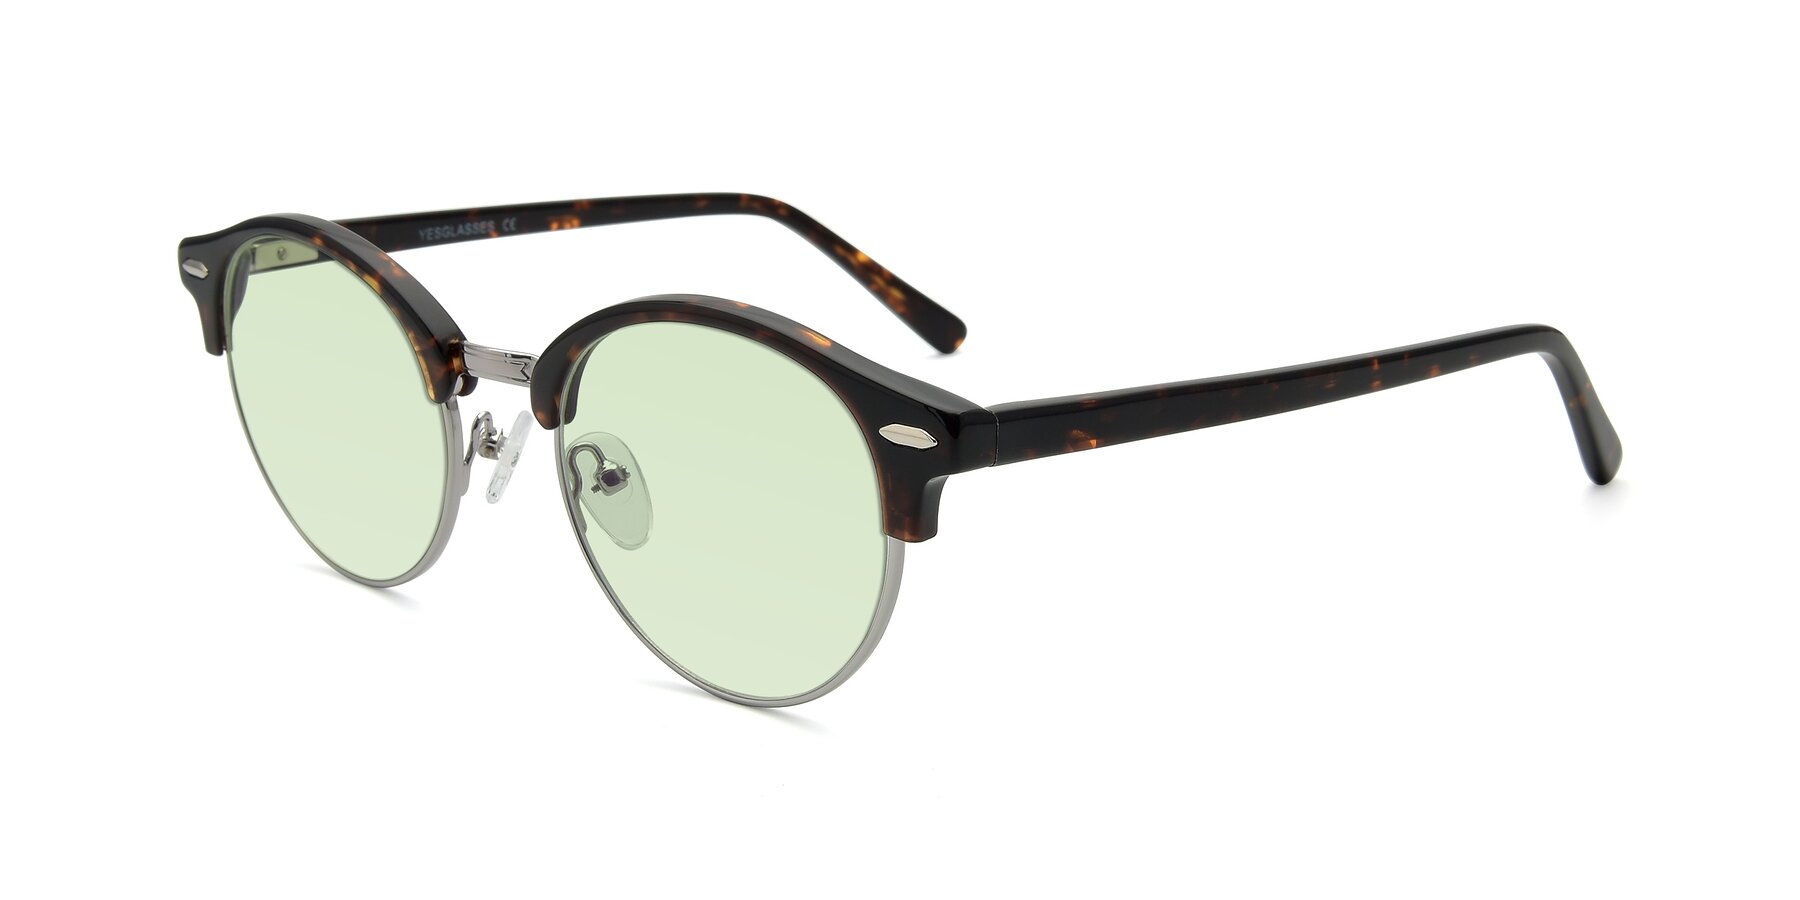 Angle of 17462 in Tortoise-Silver with Light Green Tinted Lenses